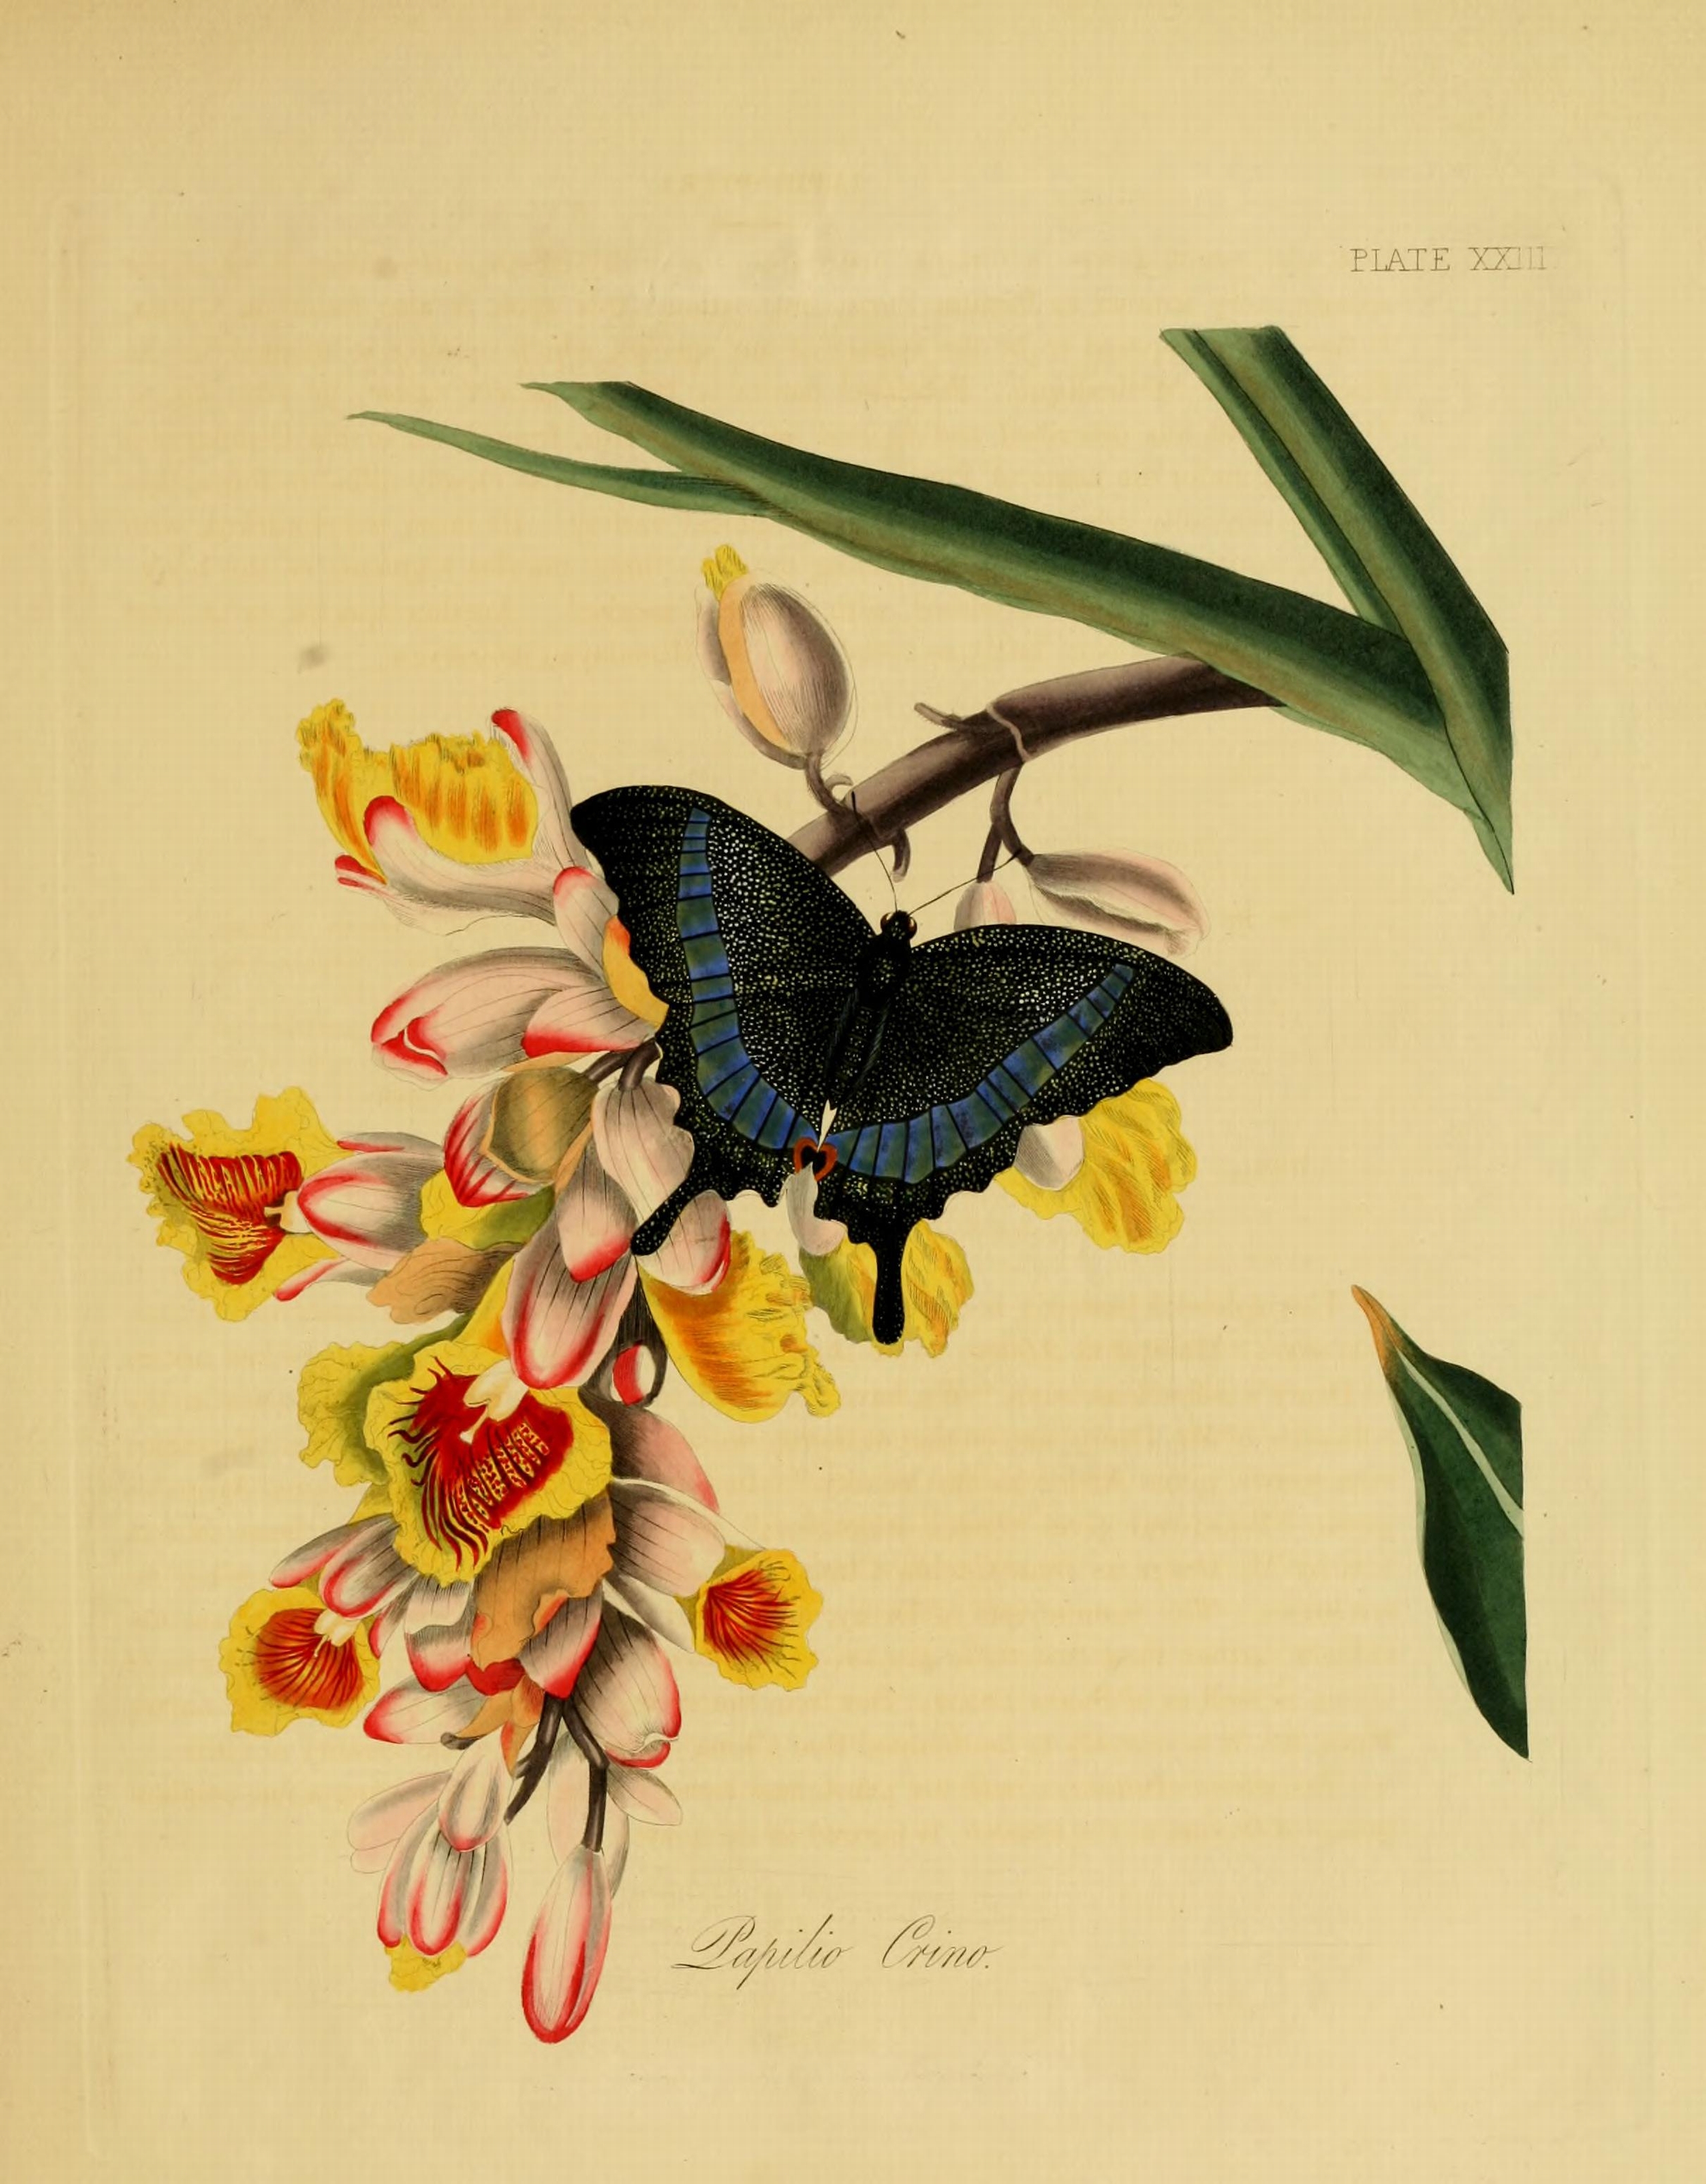 Donovan - Insects of China, 1838 - pl 23